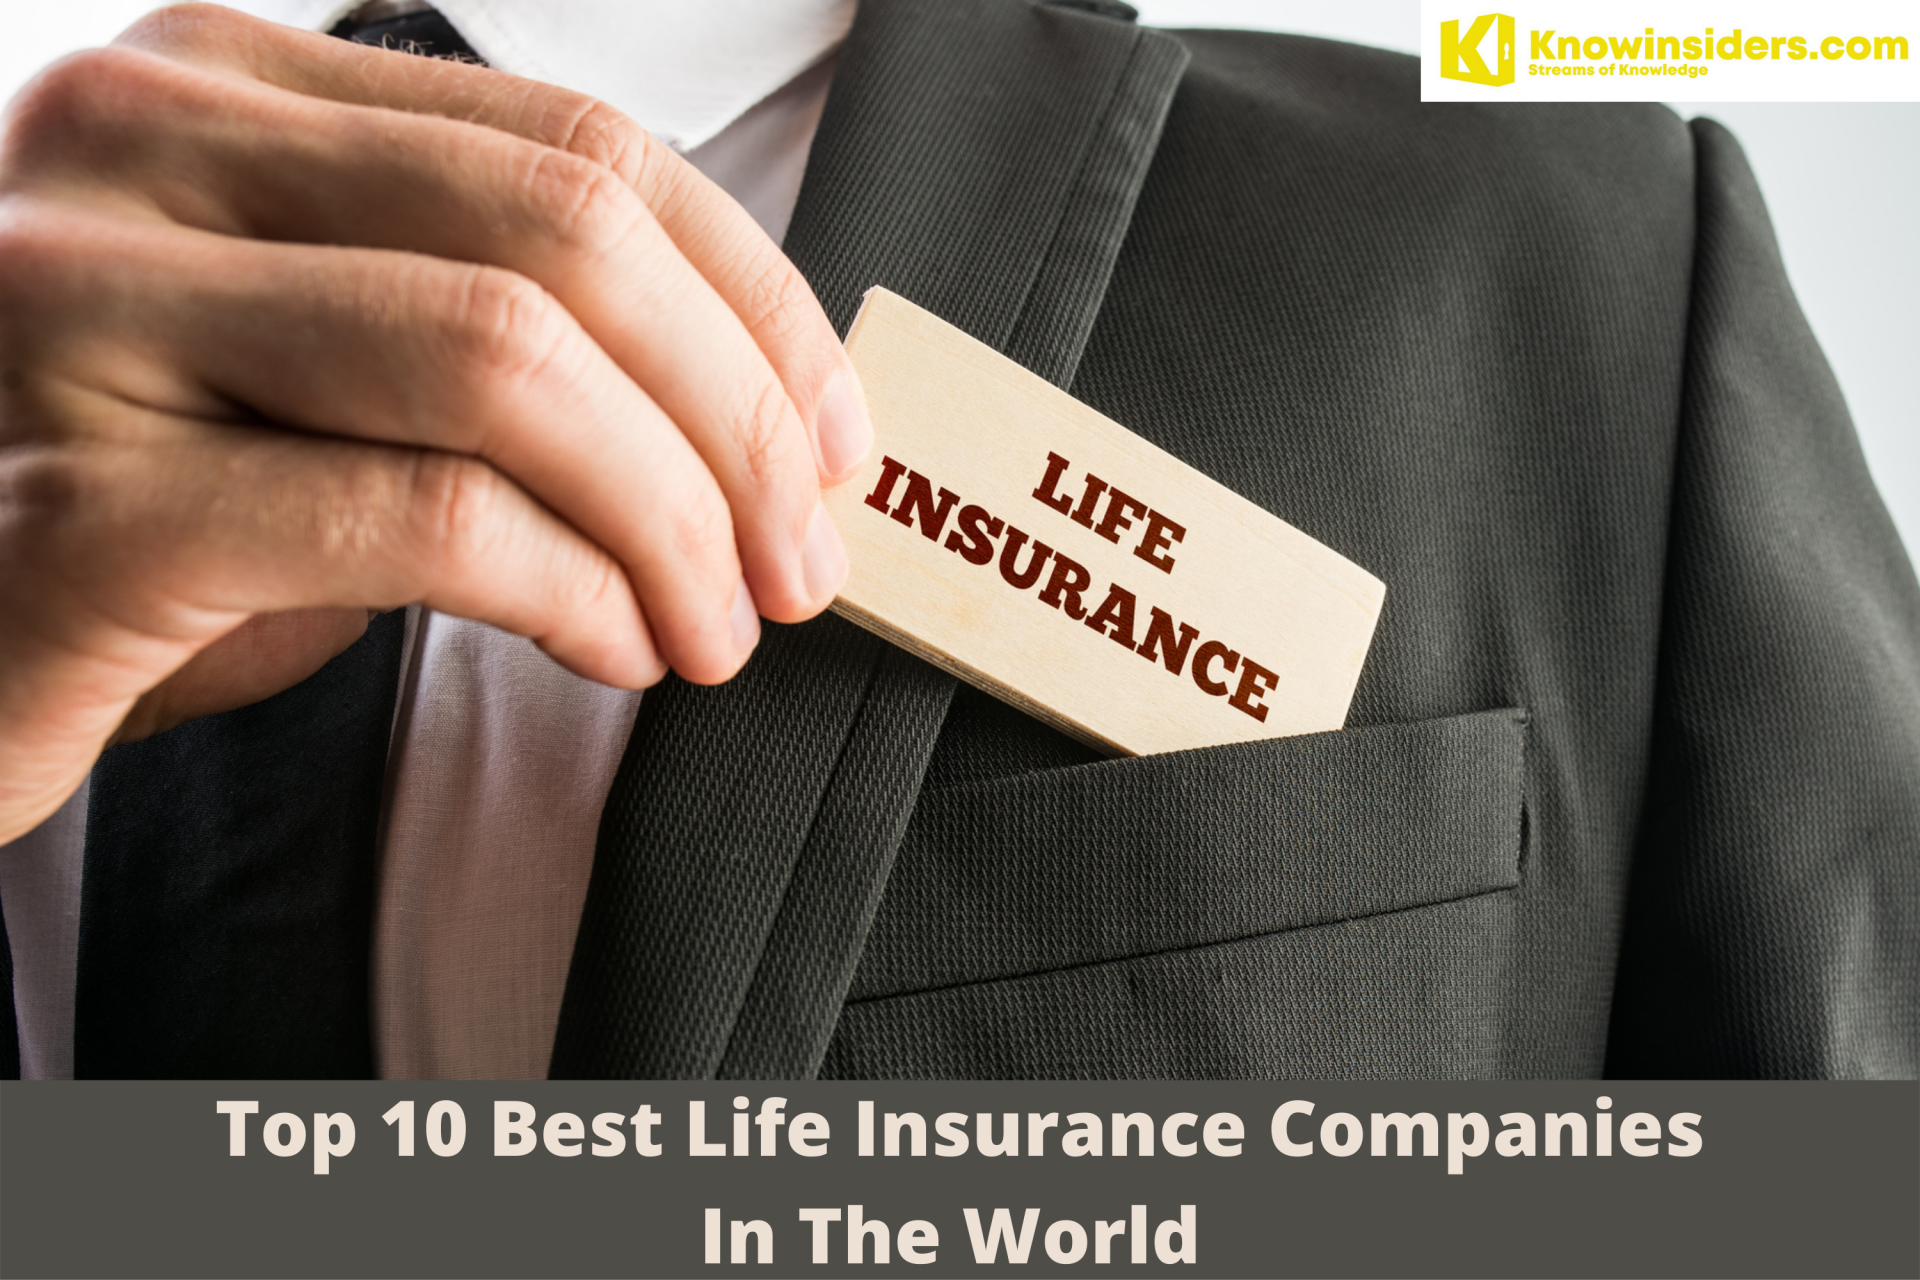 10 Best Life Insurance Companies In The World: Cheapest Quotes and Good Services